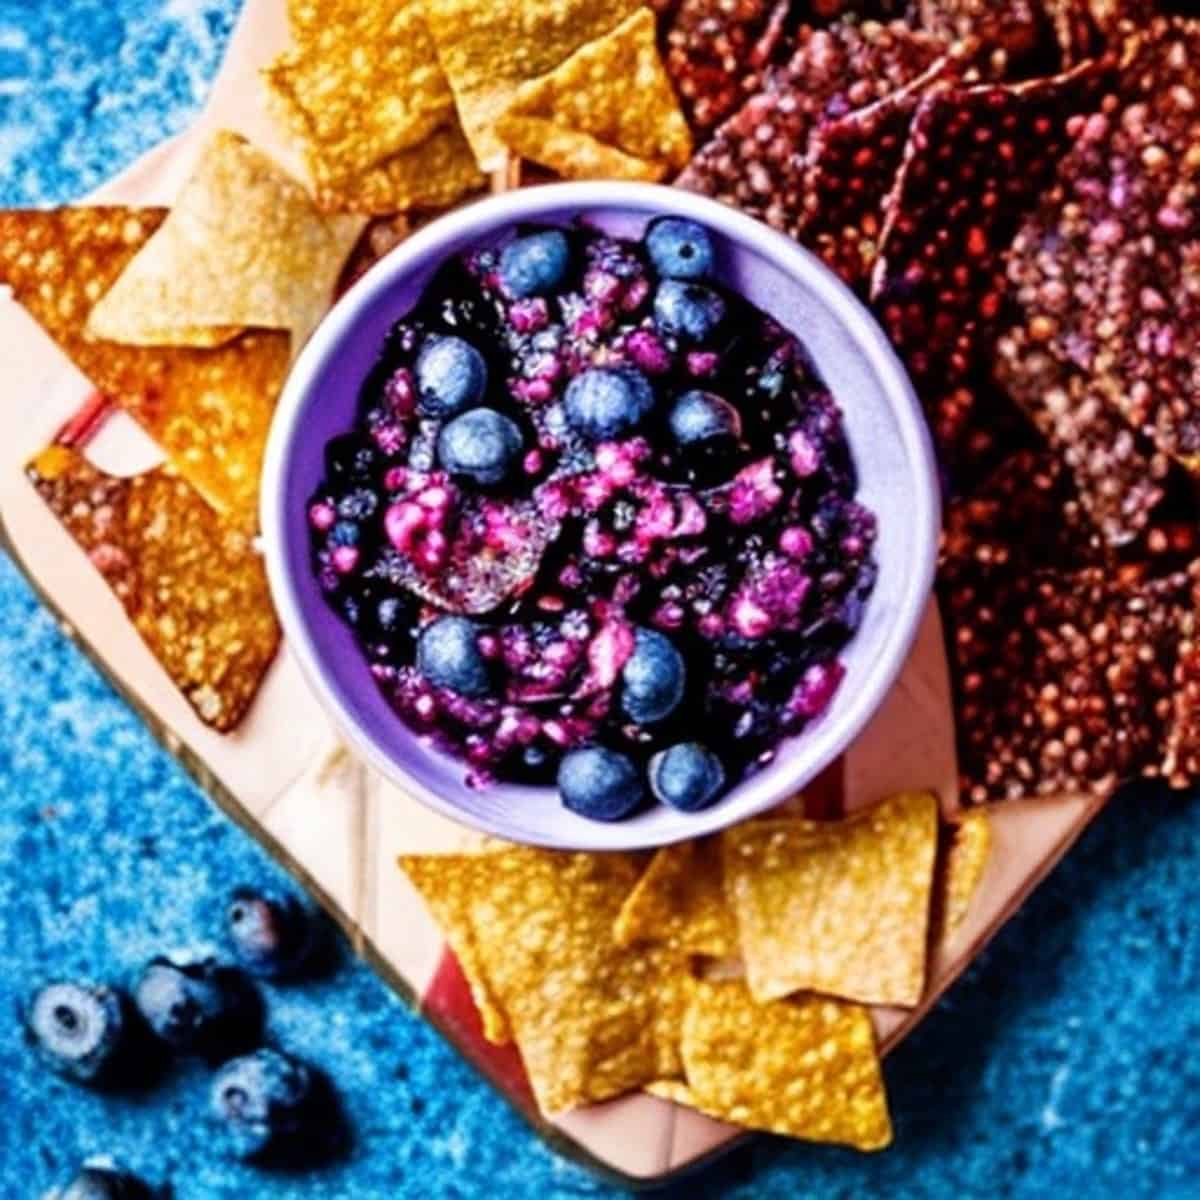 A bowl of blueberry salsa surrounded by tortilla chips. The salsa is made with blueberries, red onions, cilantro, lime juice, and jalapeños.